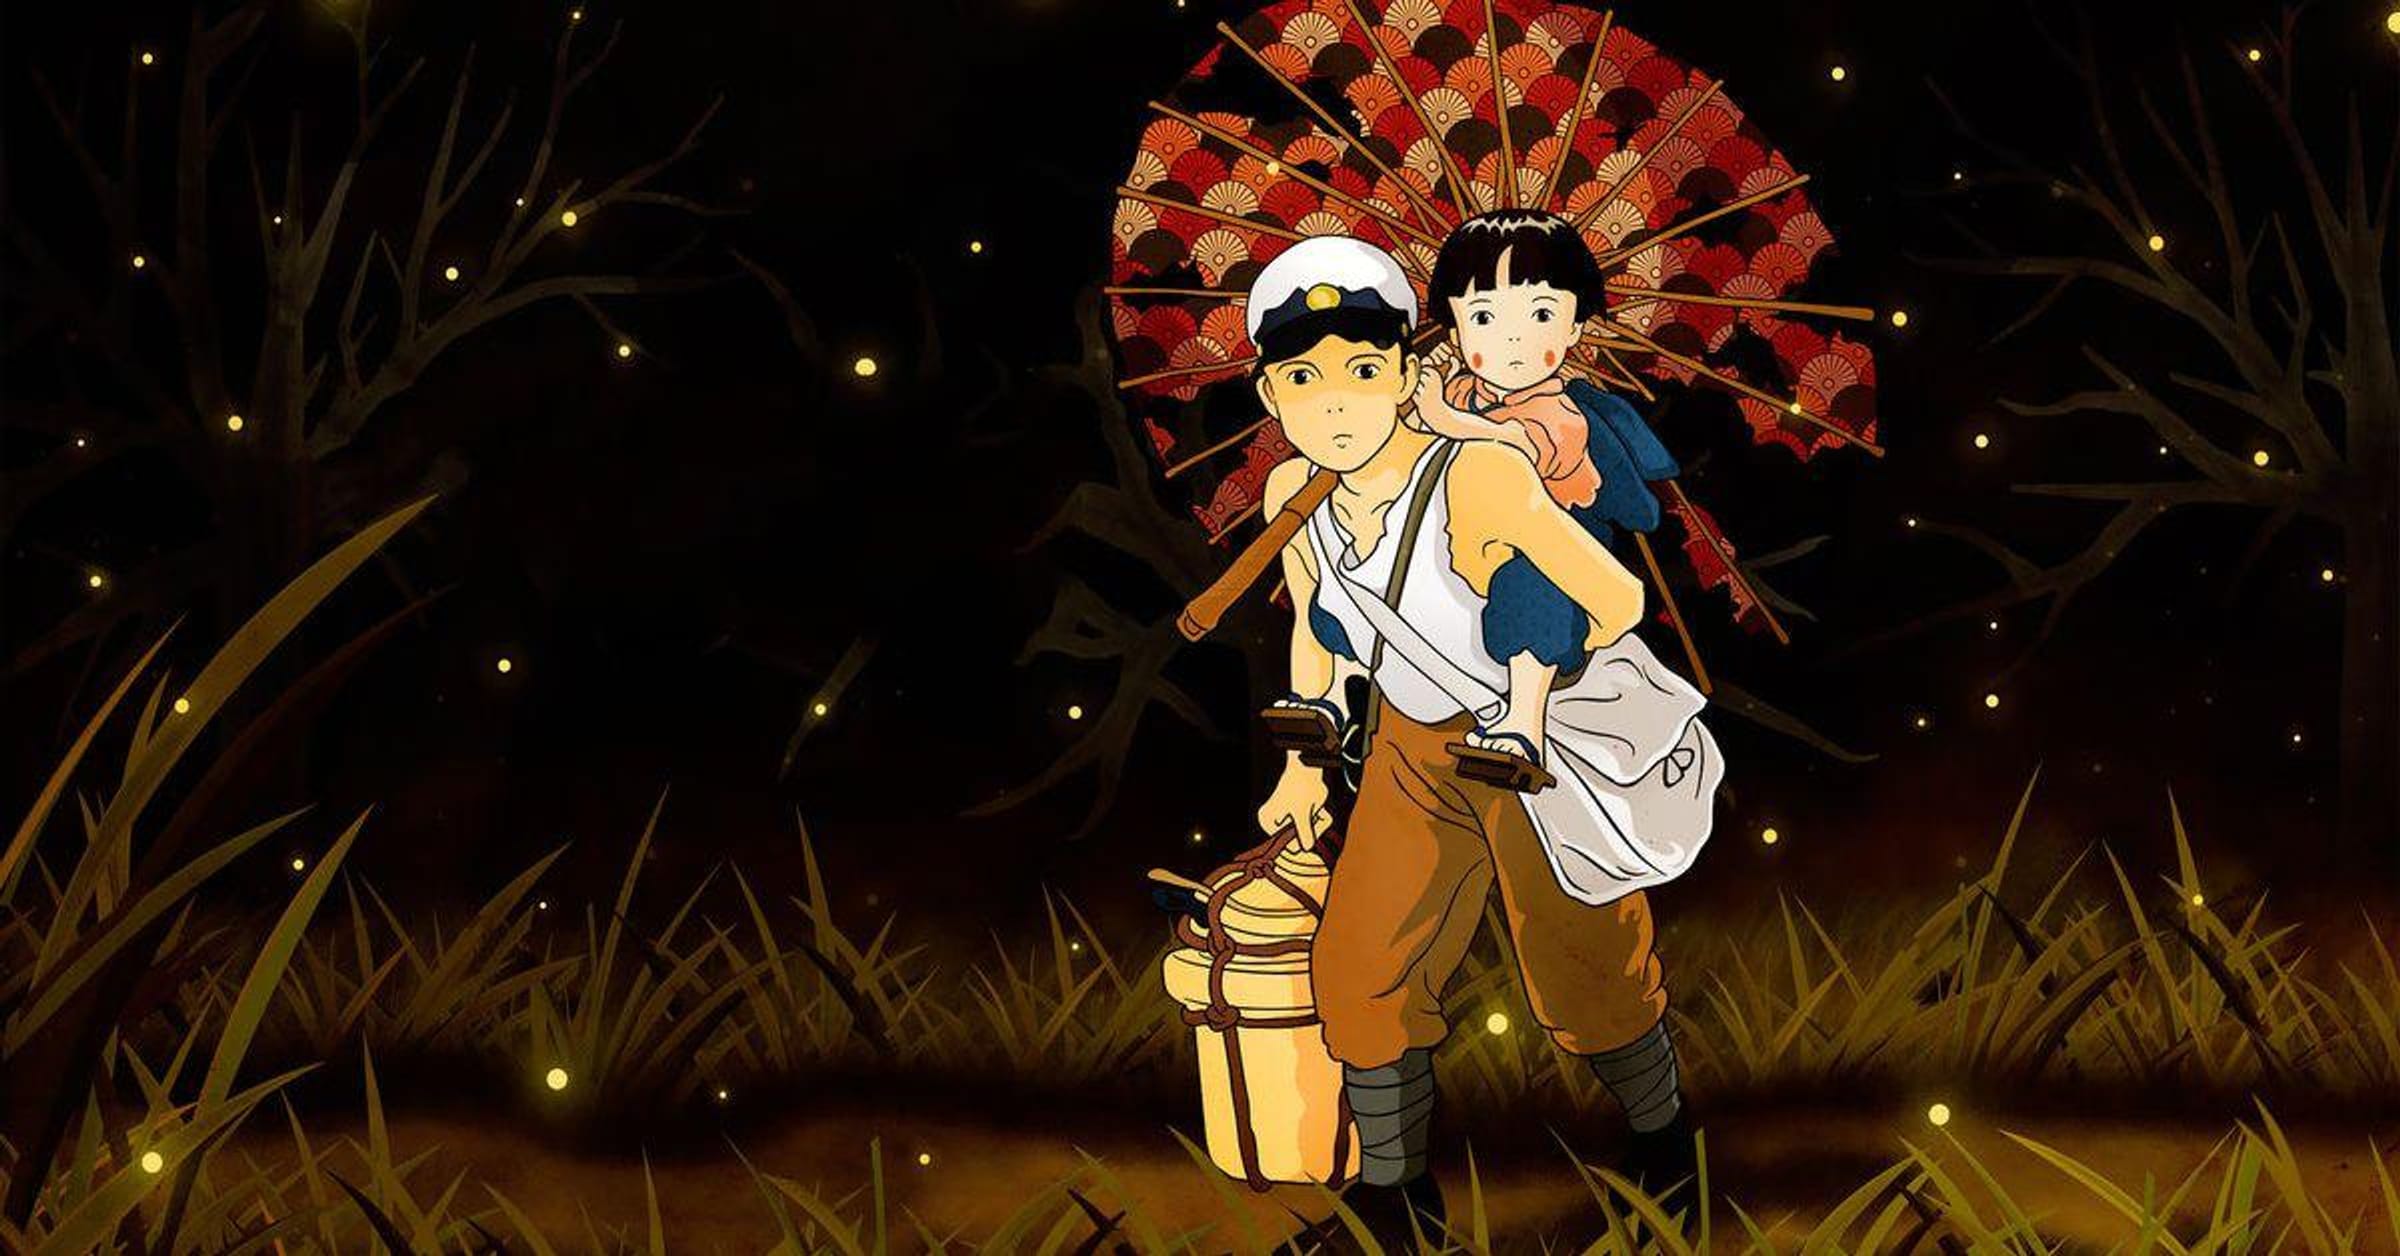 hey, uh, pinterestmaybe grave of the fireflies wasn't the best movie to  use for this article : r/CrappyDesign